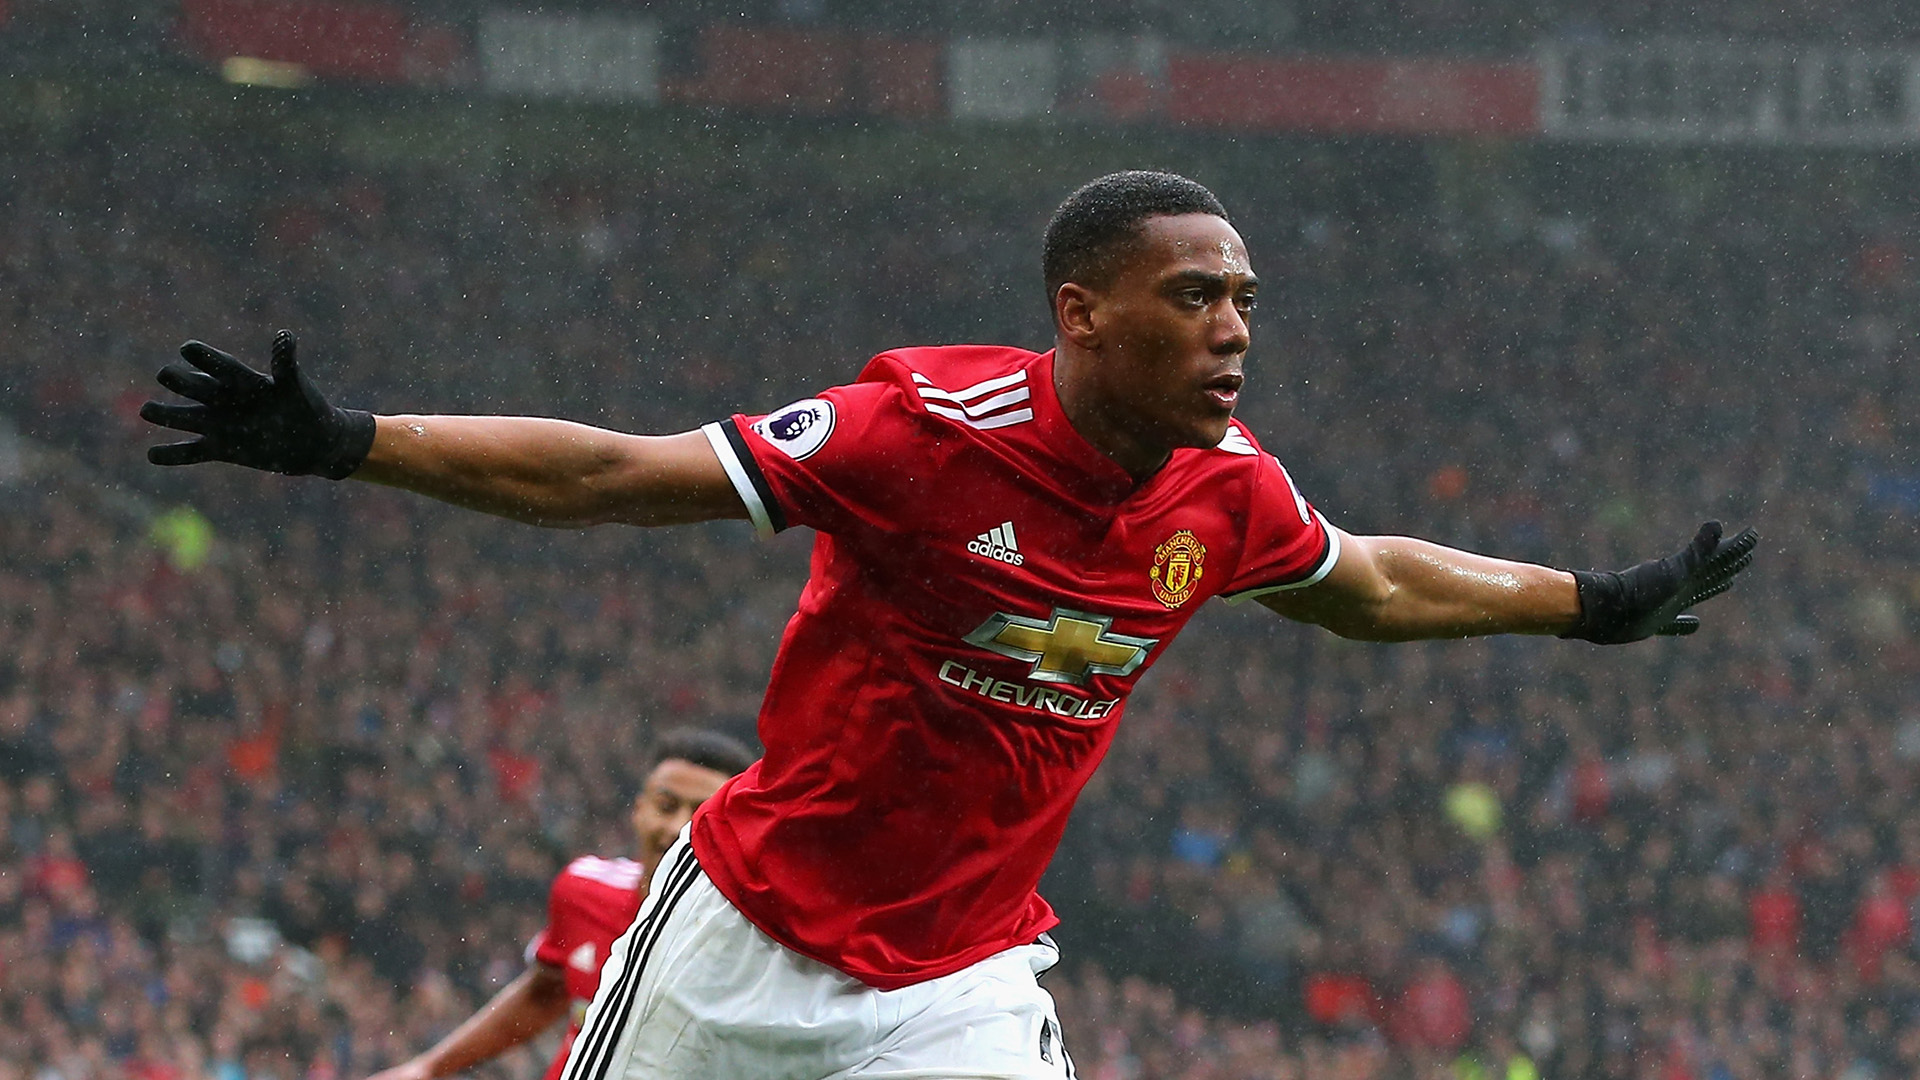 Manchester United news: Anthony Martial plays at 85 per cent - Gary